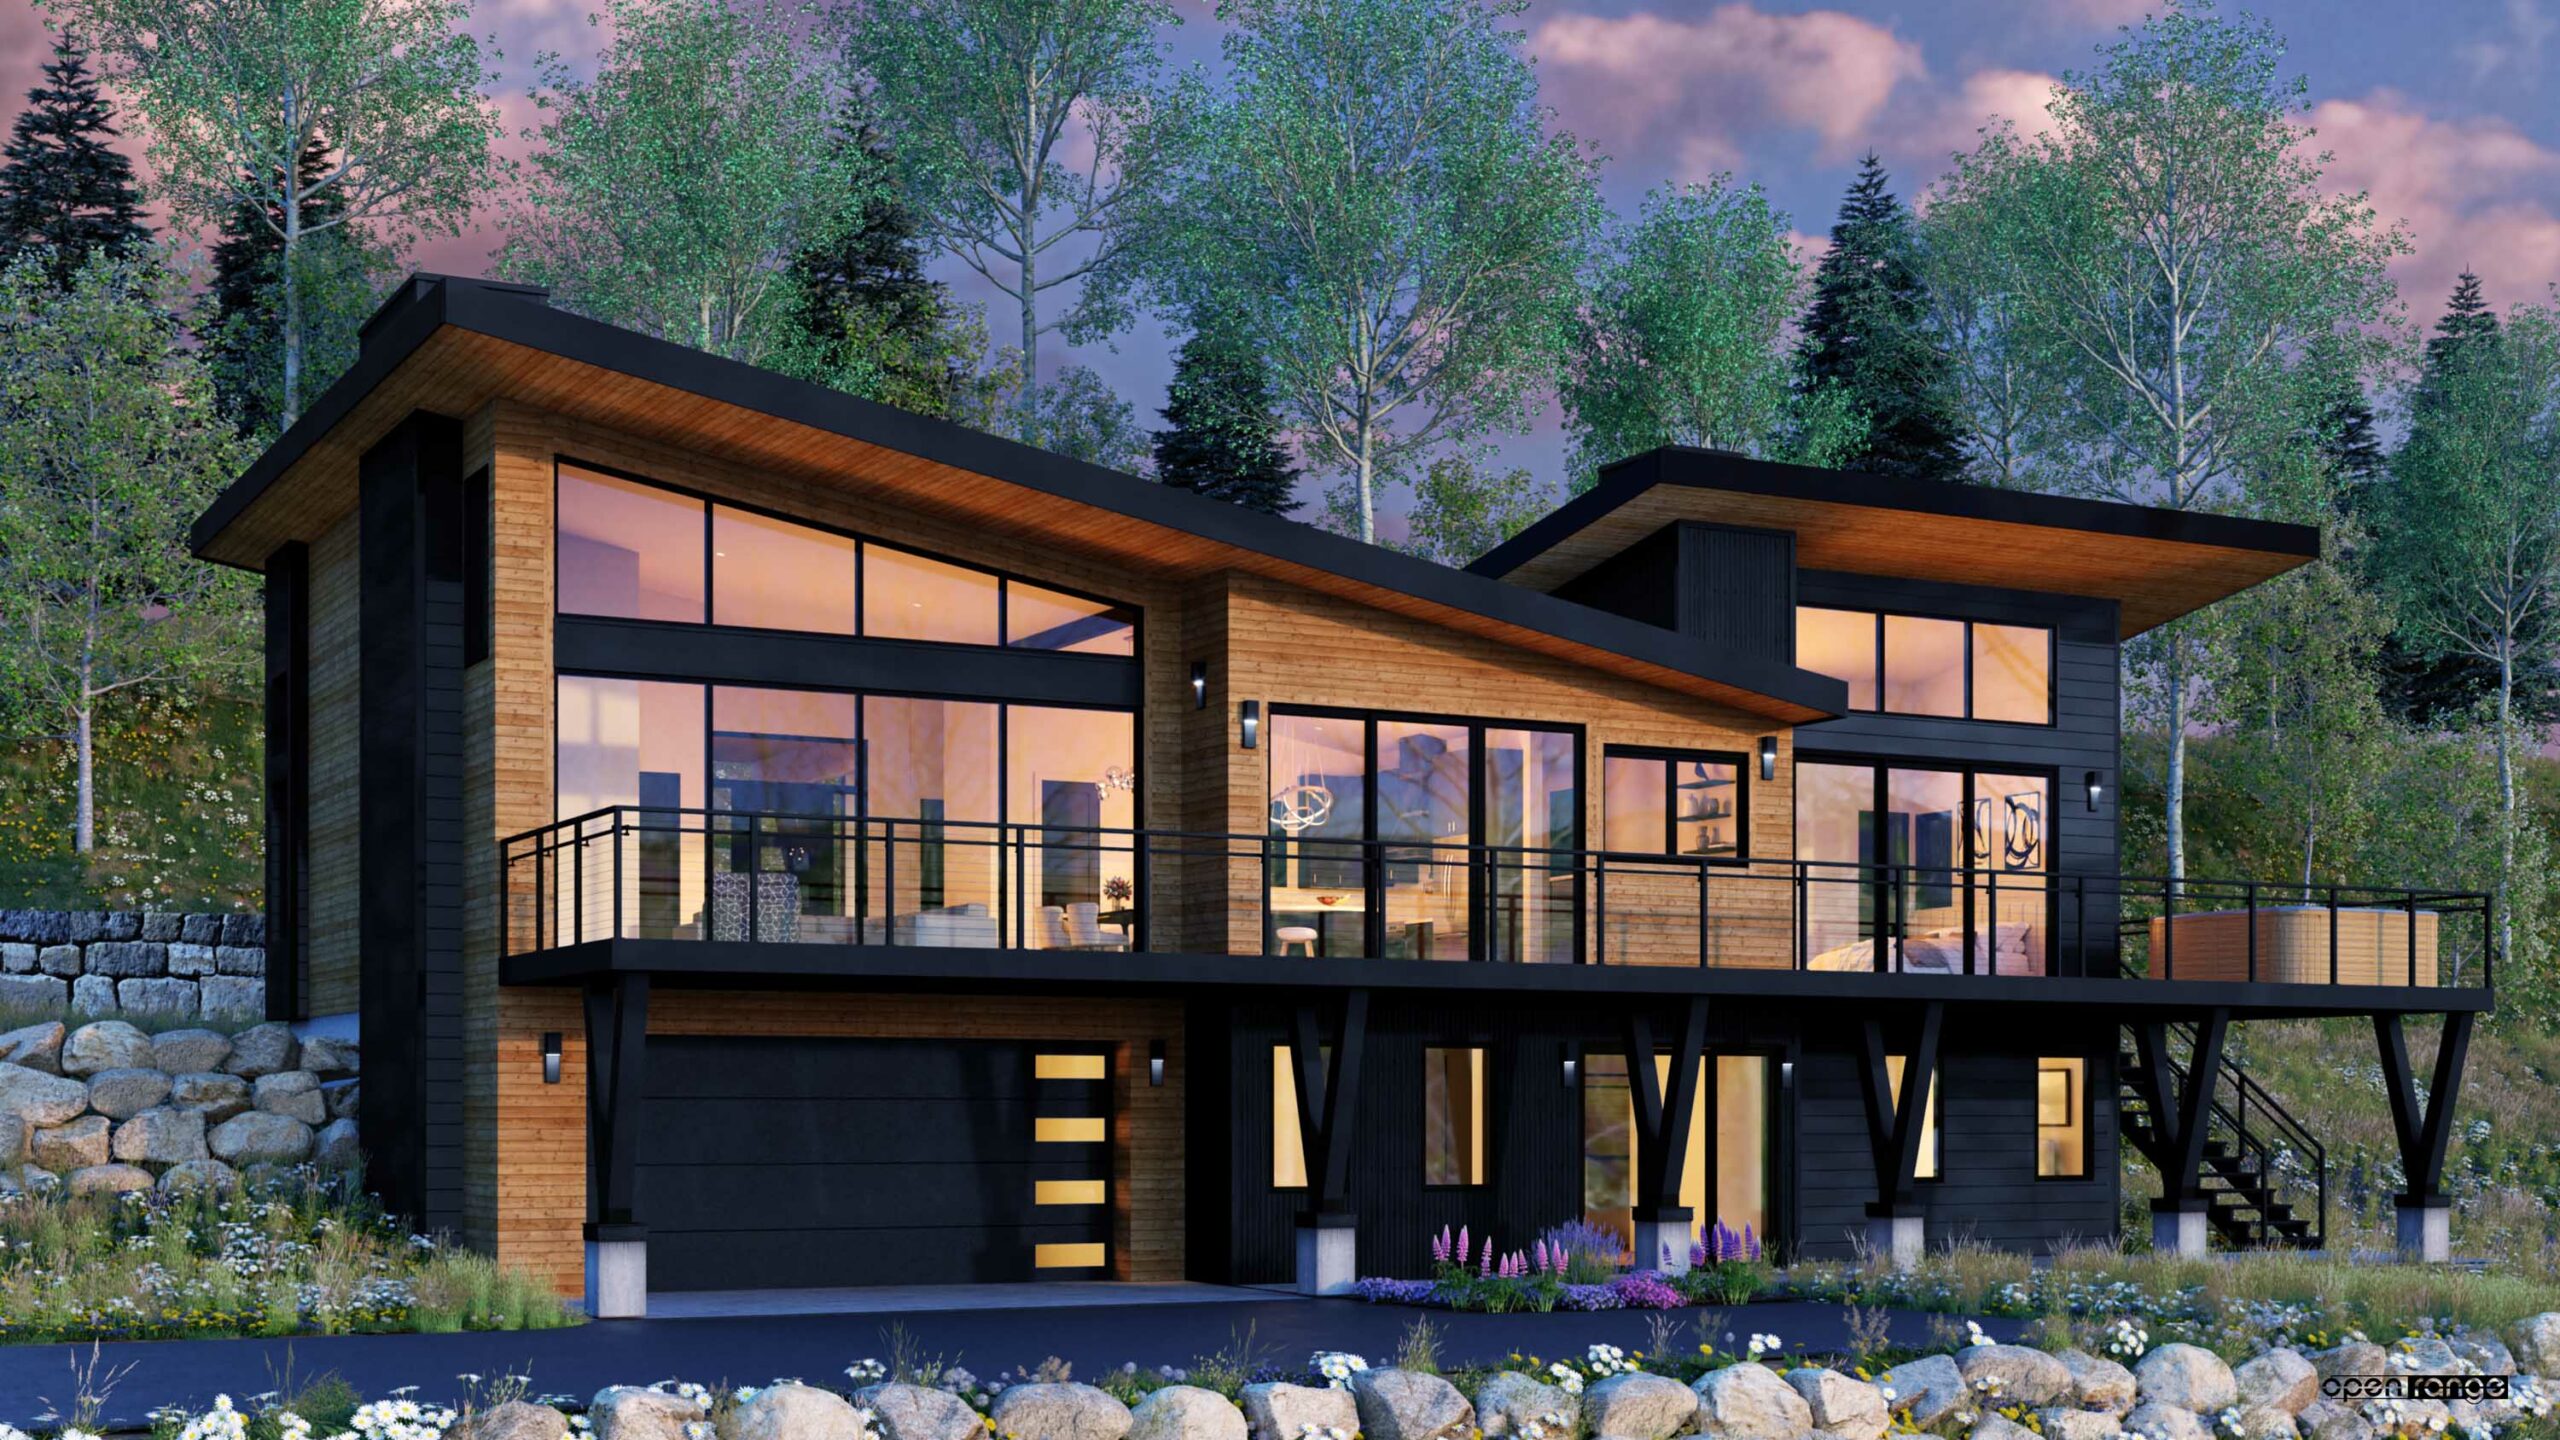 38 Ruby Drive Mt. Crested Butte, Colorado - Exterior rendering